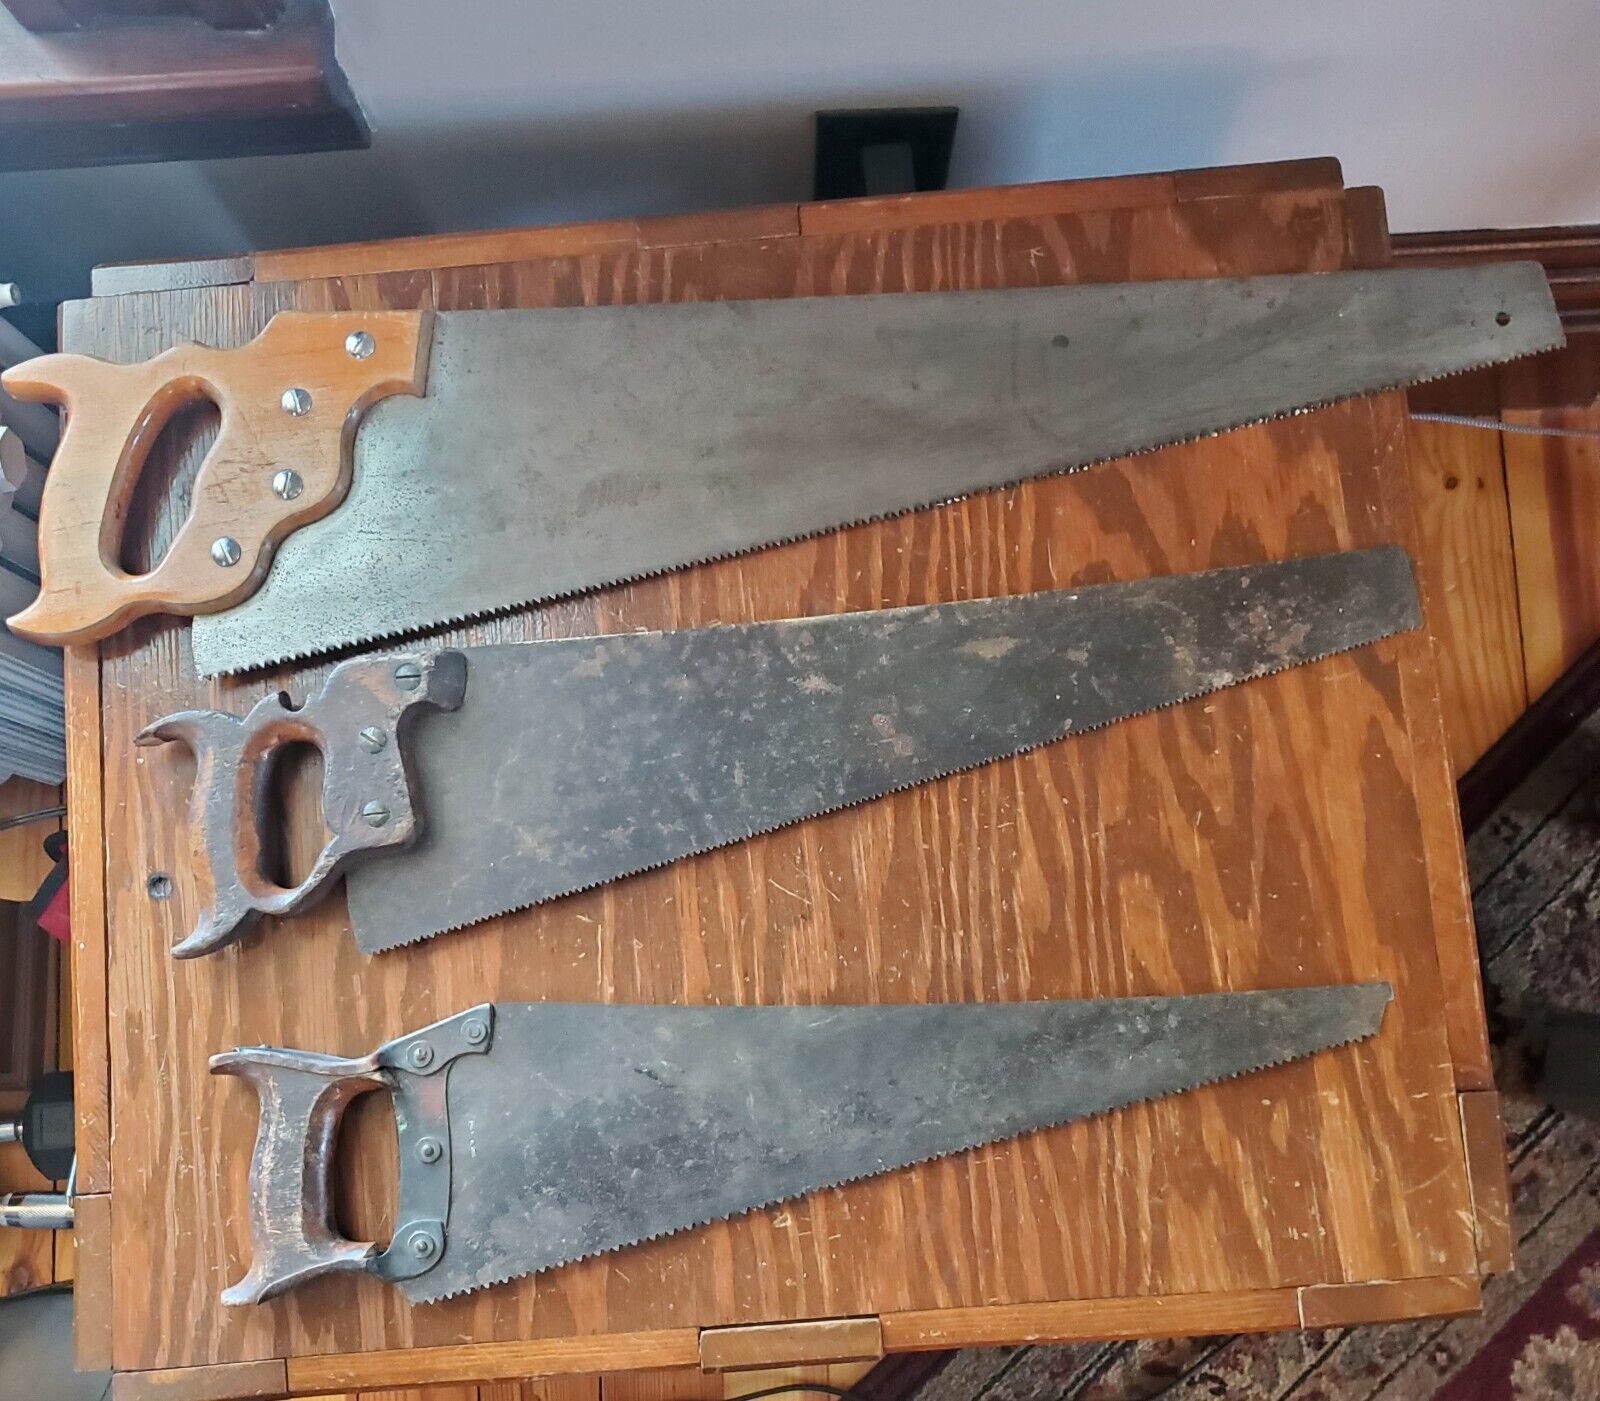 Lot of 3 Hand saws.  At Least One Is Vintage.  Take a look